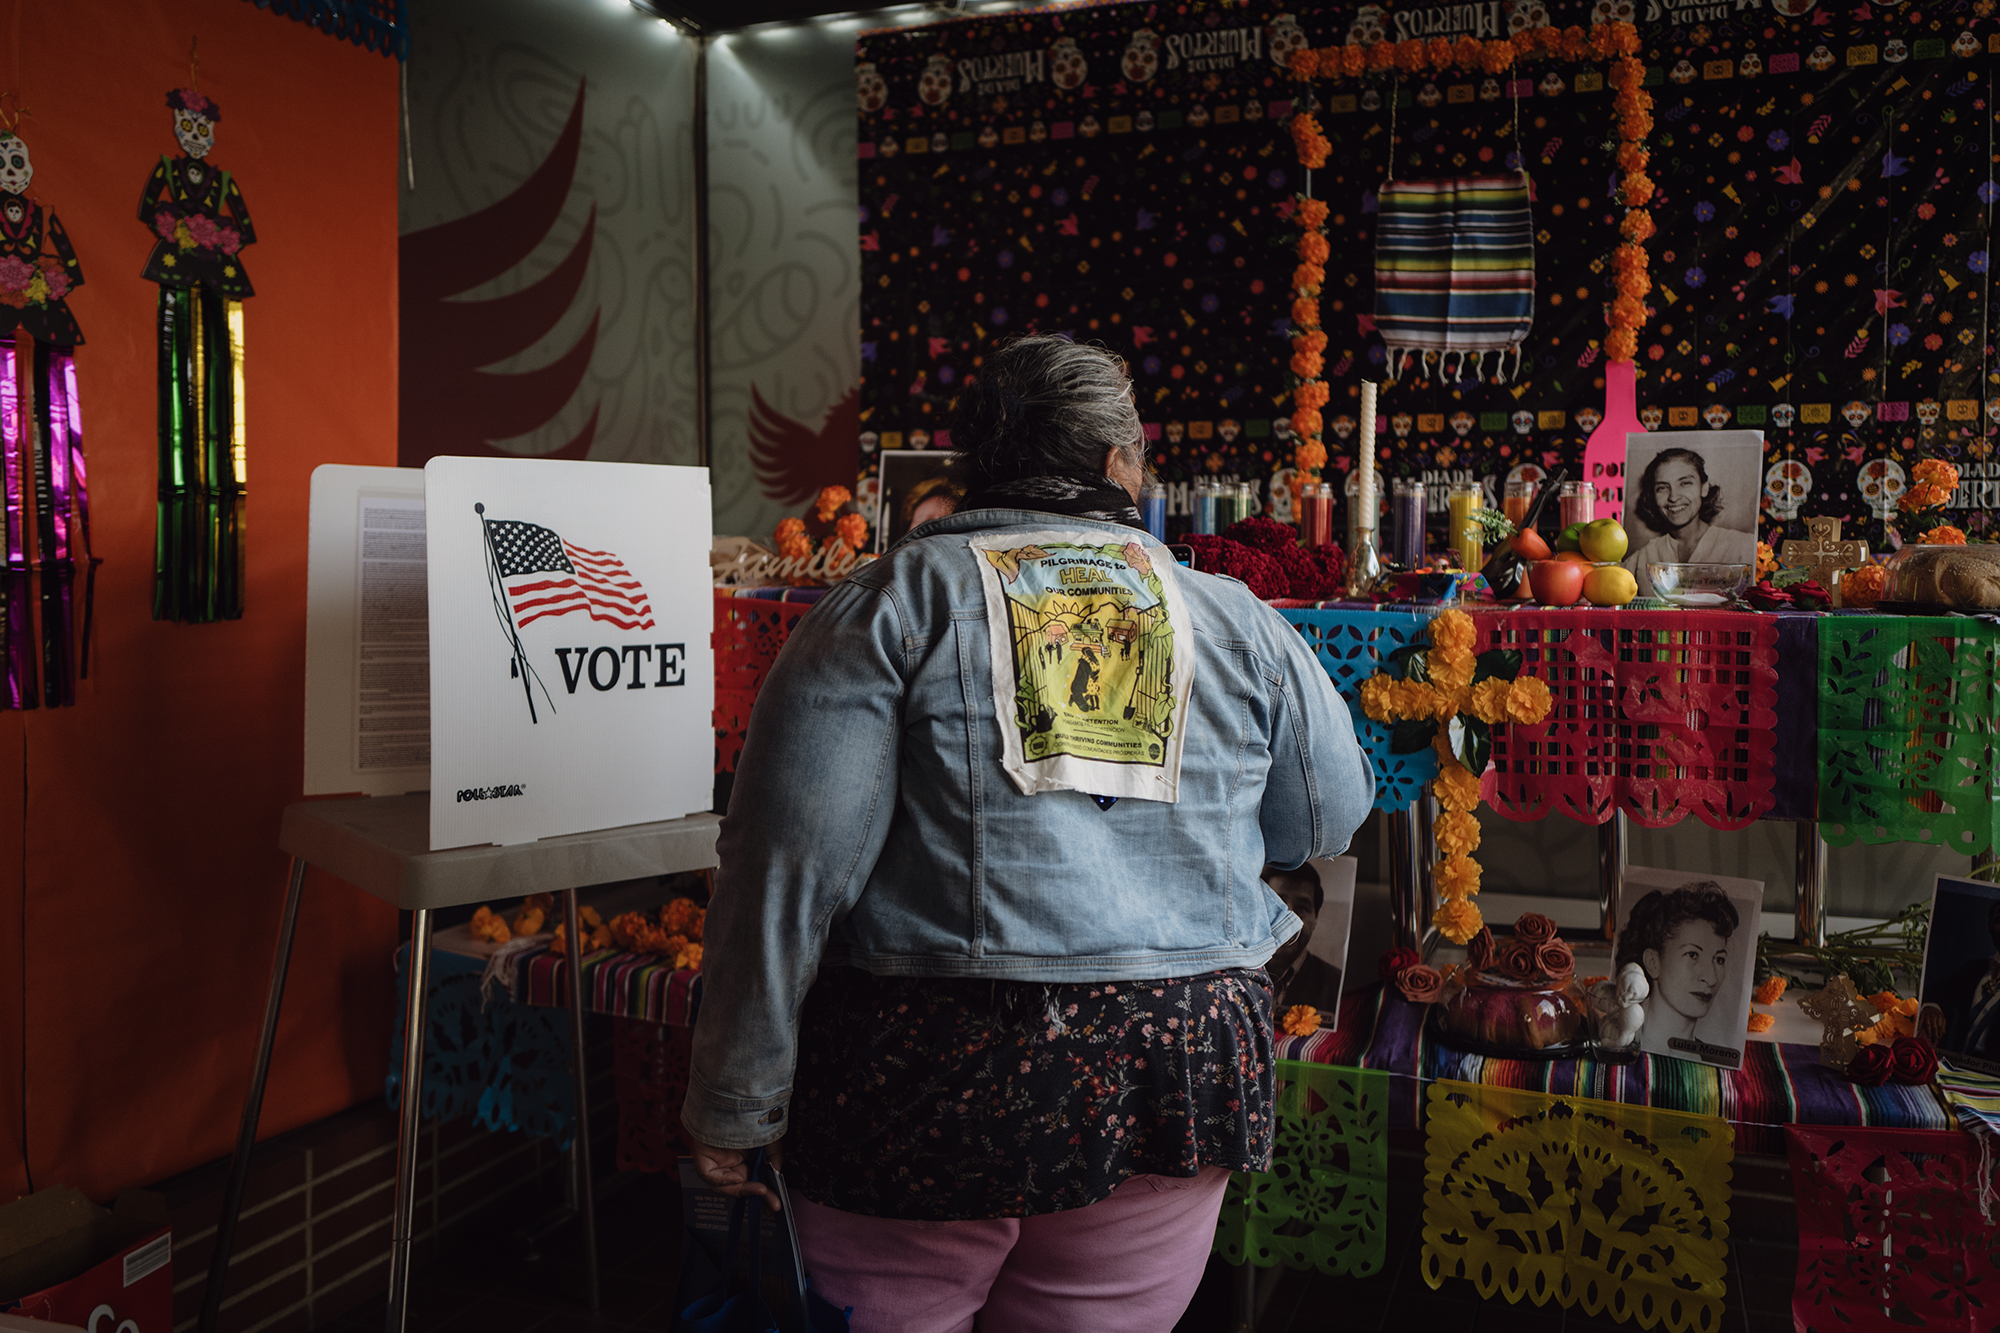 Voting booths in front of an altar for Dias de los Muertos during the Latino Mock Voting event organized by The League of United Latin American Citizens in Tulare on Nov. 1, 2023. Photo by Zaydee Sanchez for CalMatters